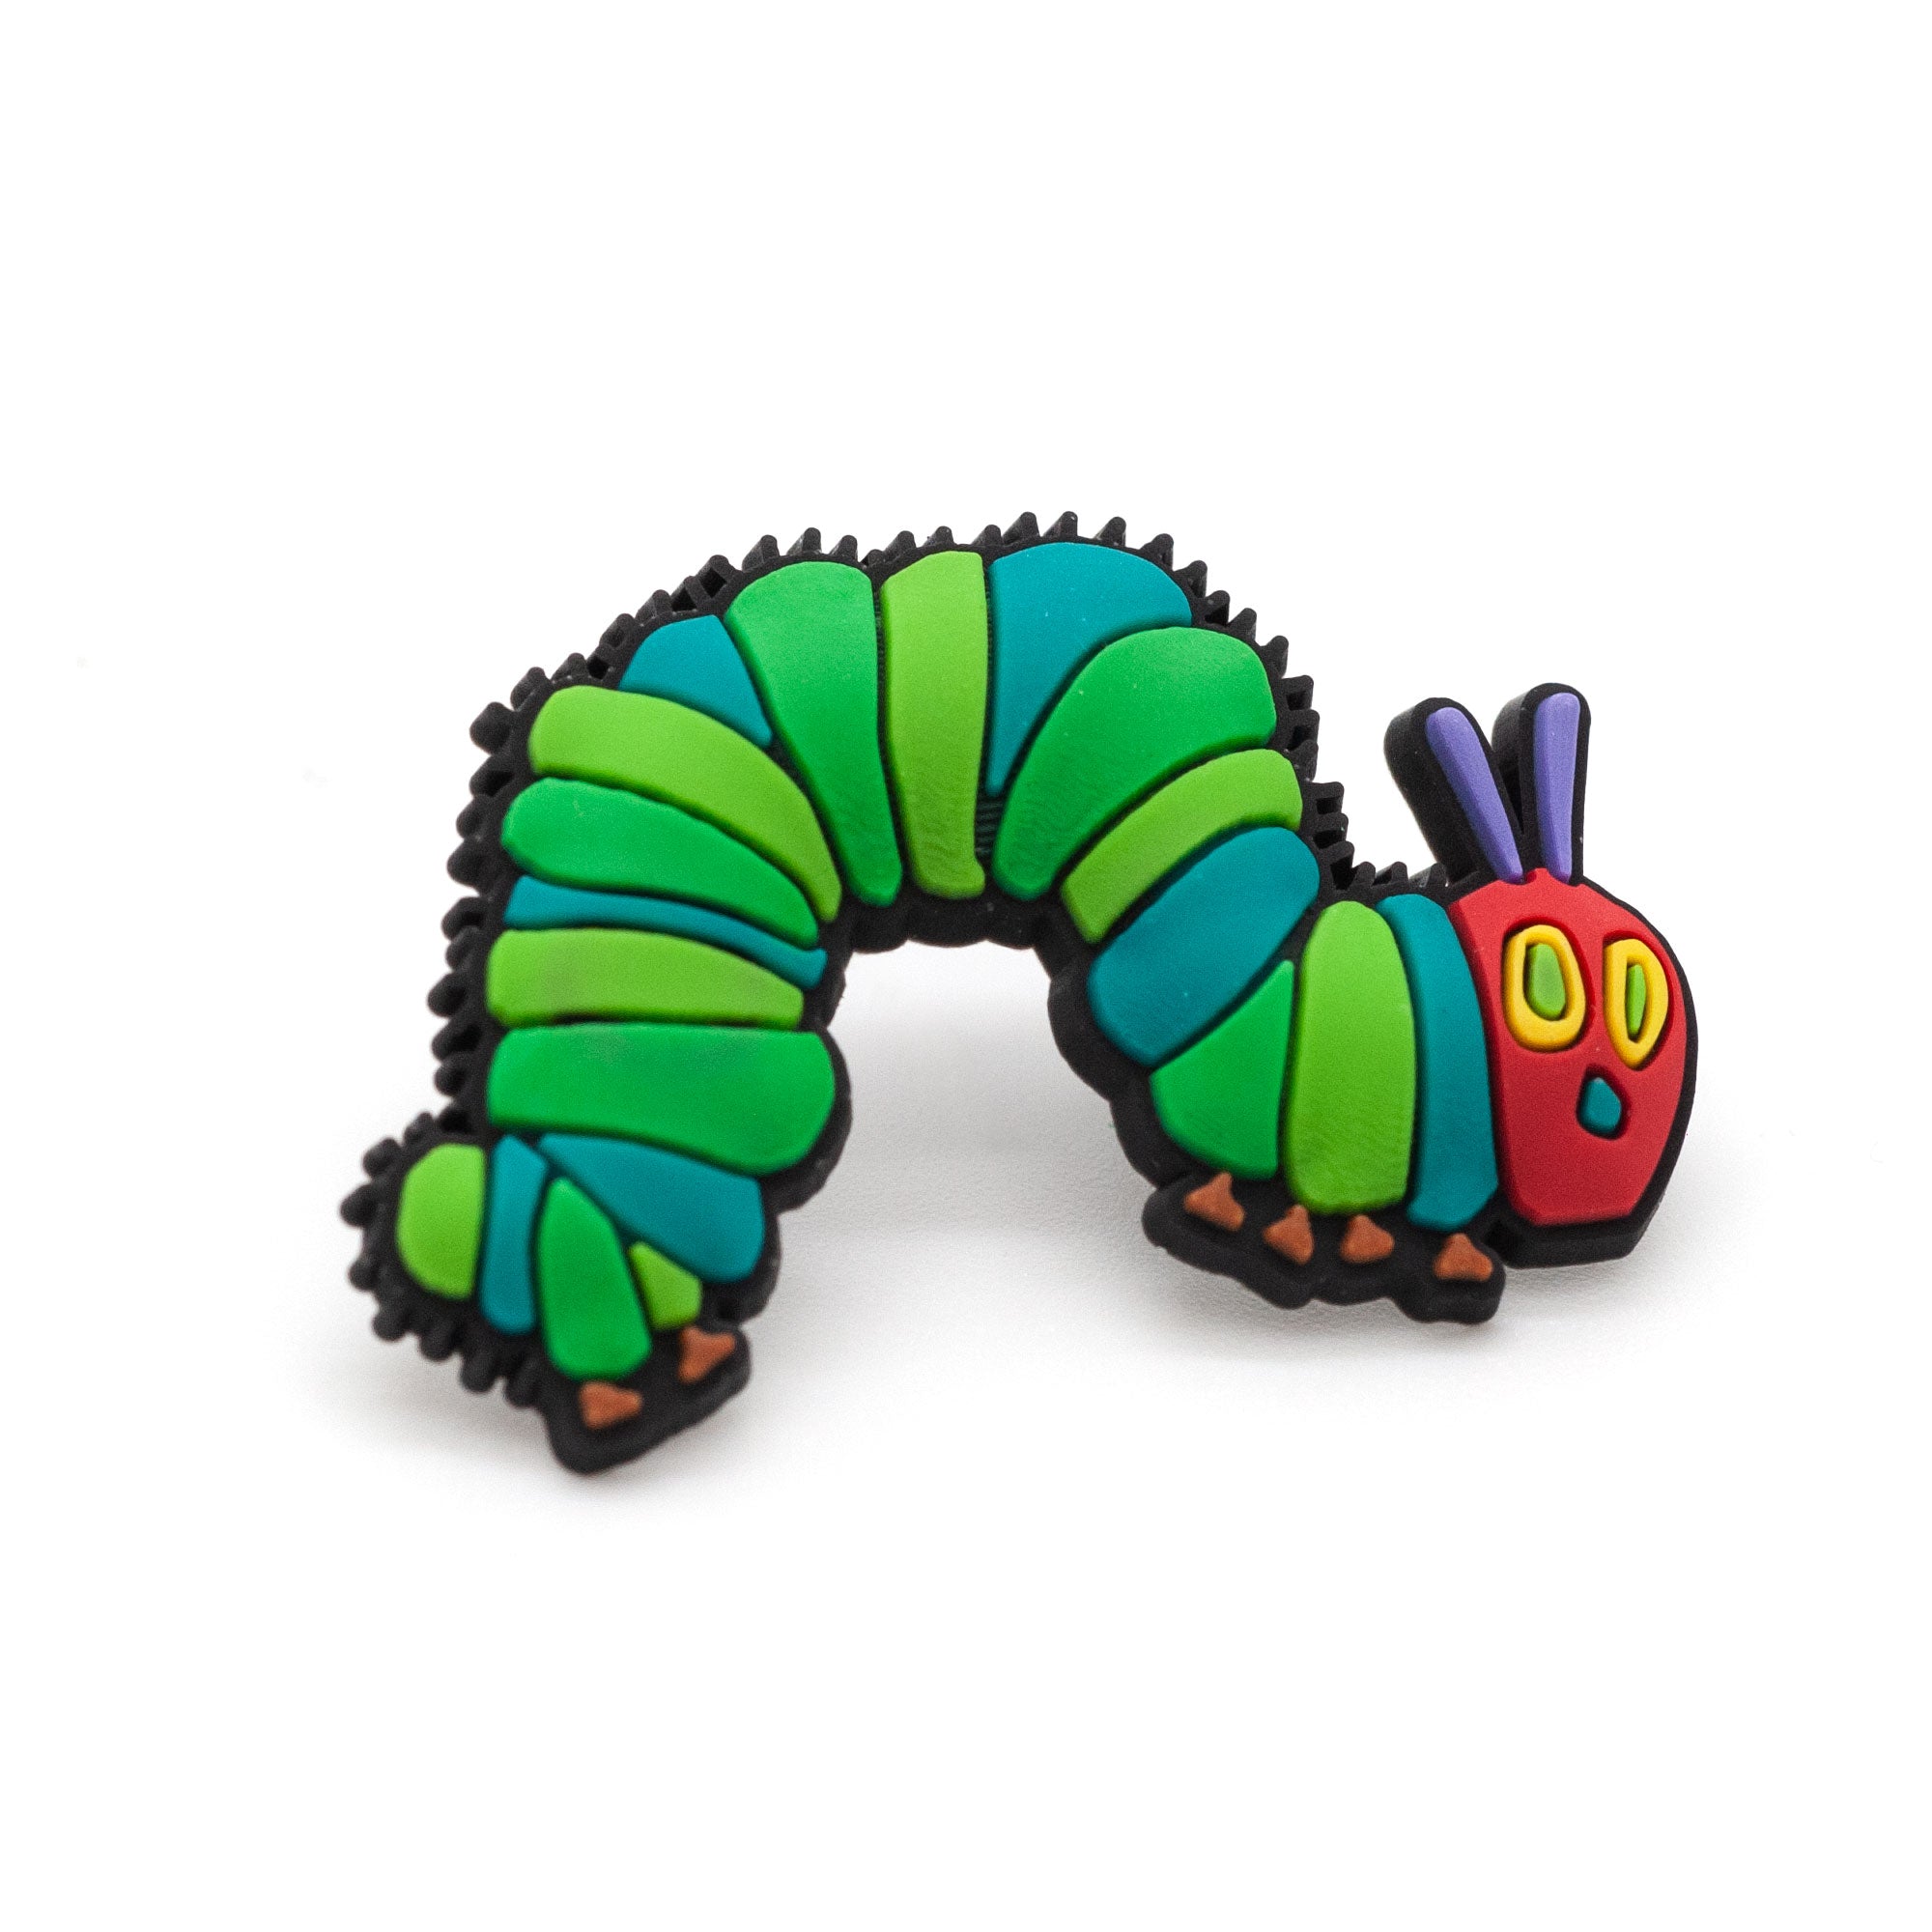 The Very Hungry Caterpillar PVC enamel pin on white background. Caterpillar has a red face with yellow and green eyes , with purple antennas, and a light green and dark green body.